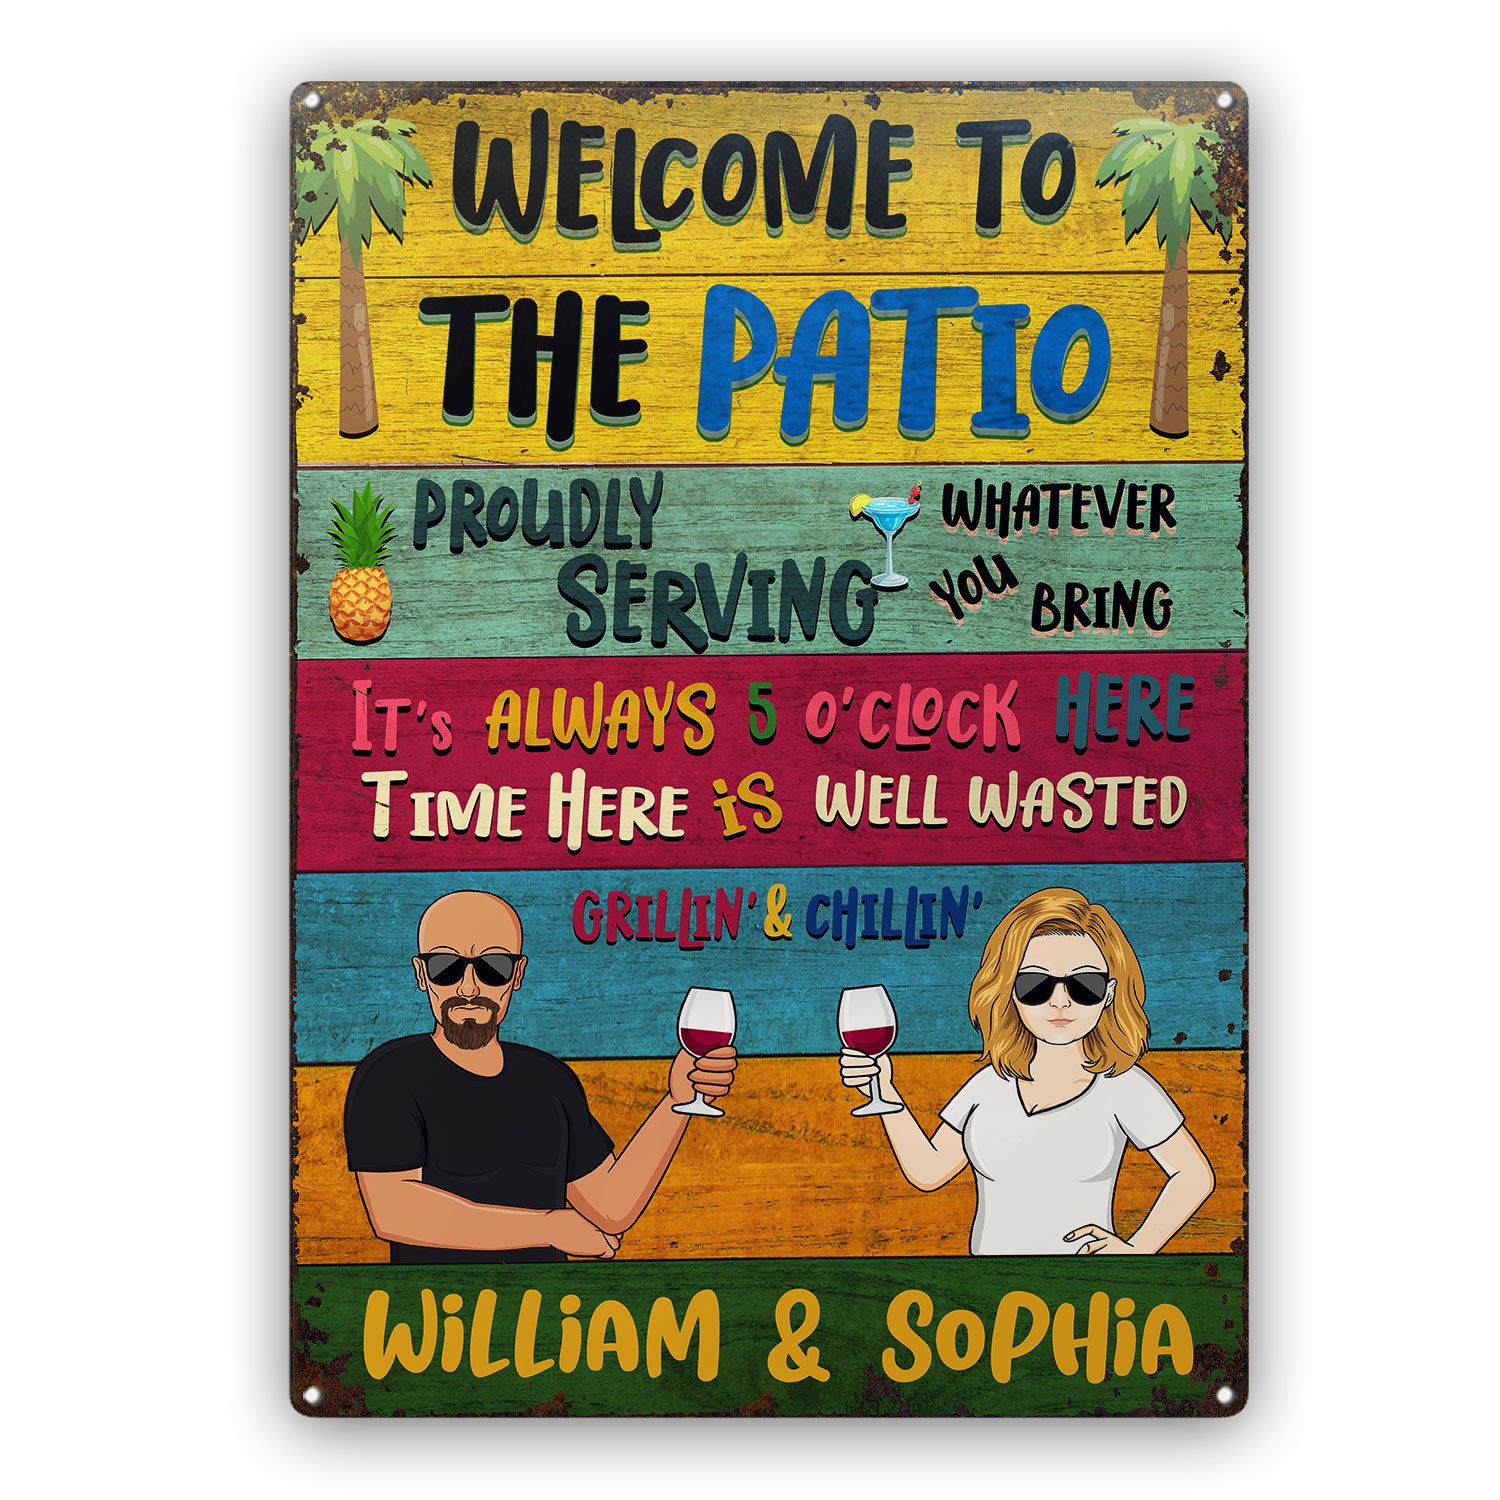 Patio Welcome Grilling Proudly Serving Whatever You Bring Husband Wife Couple Single - Home Decor, Backyard Decor, Gift For Her, Him, Family - Personalized Custom Classic Metal Signs